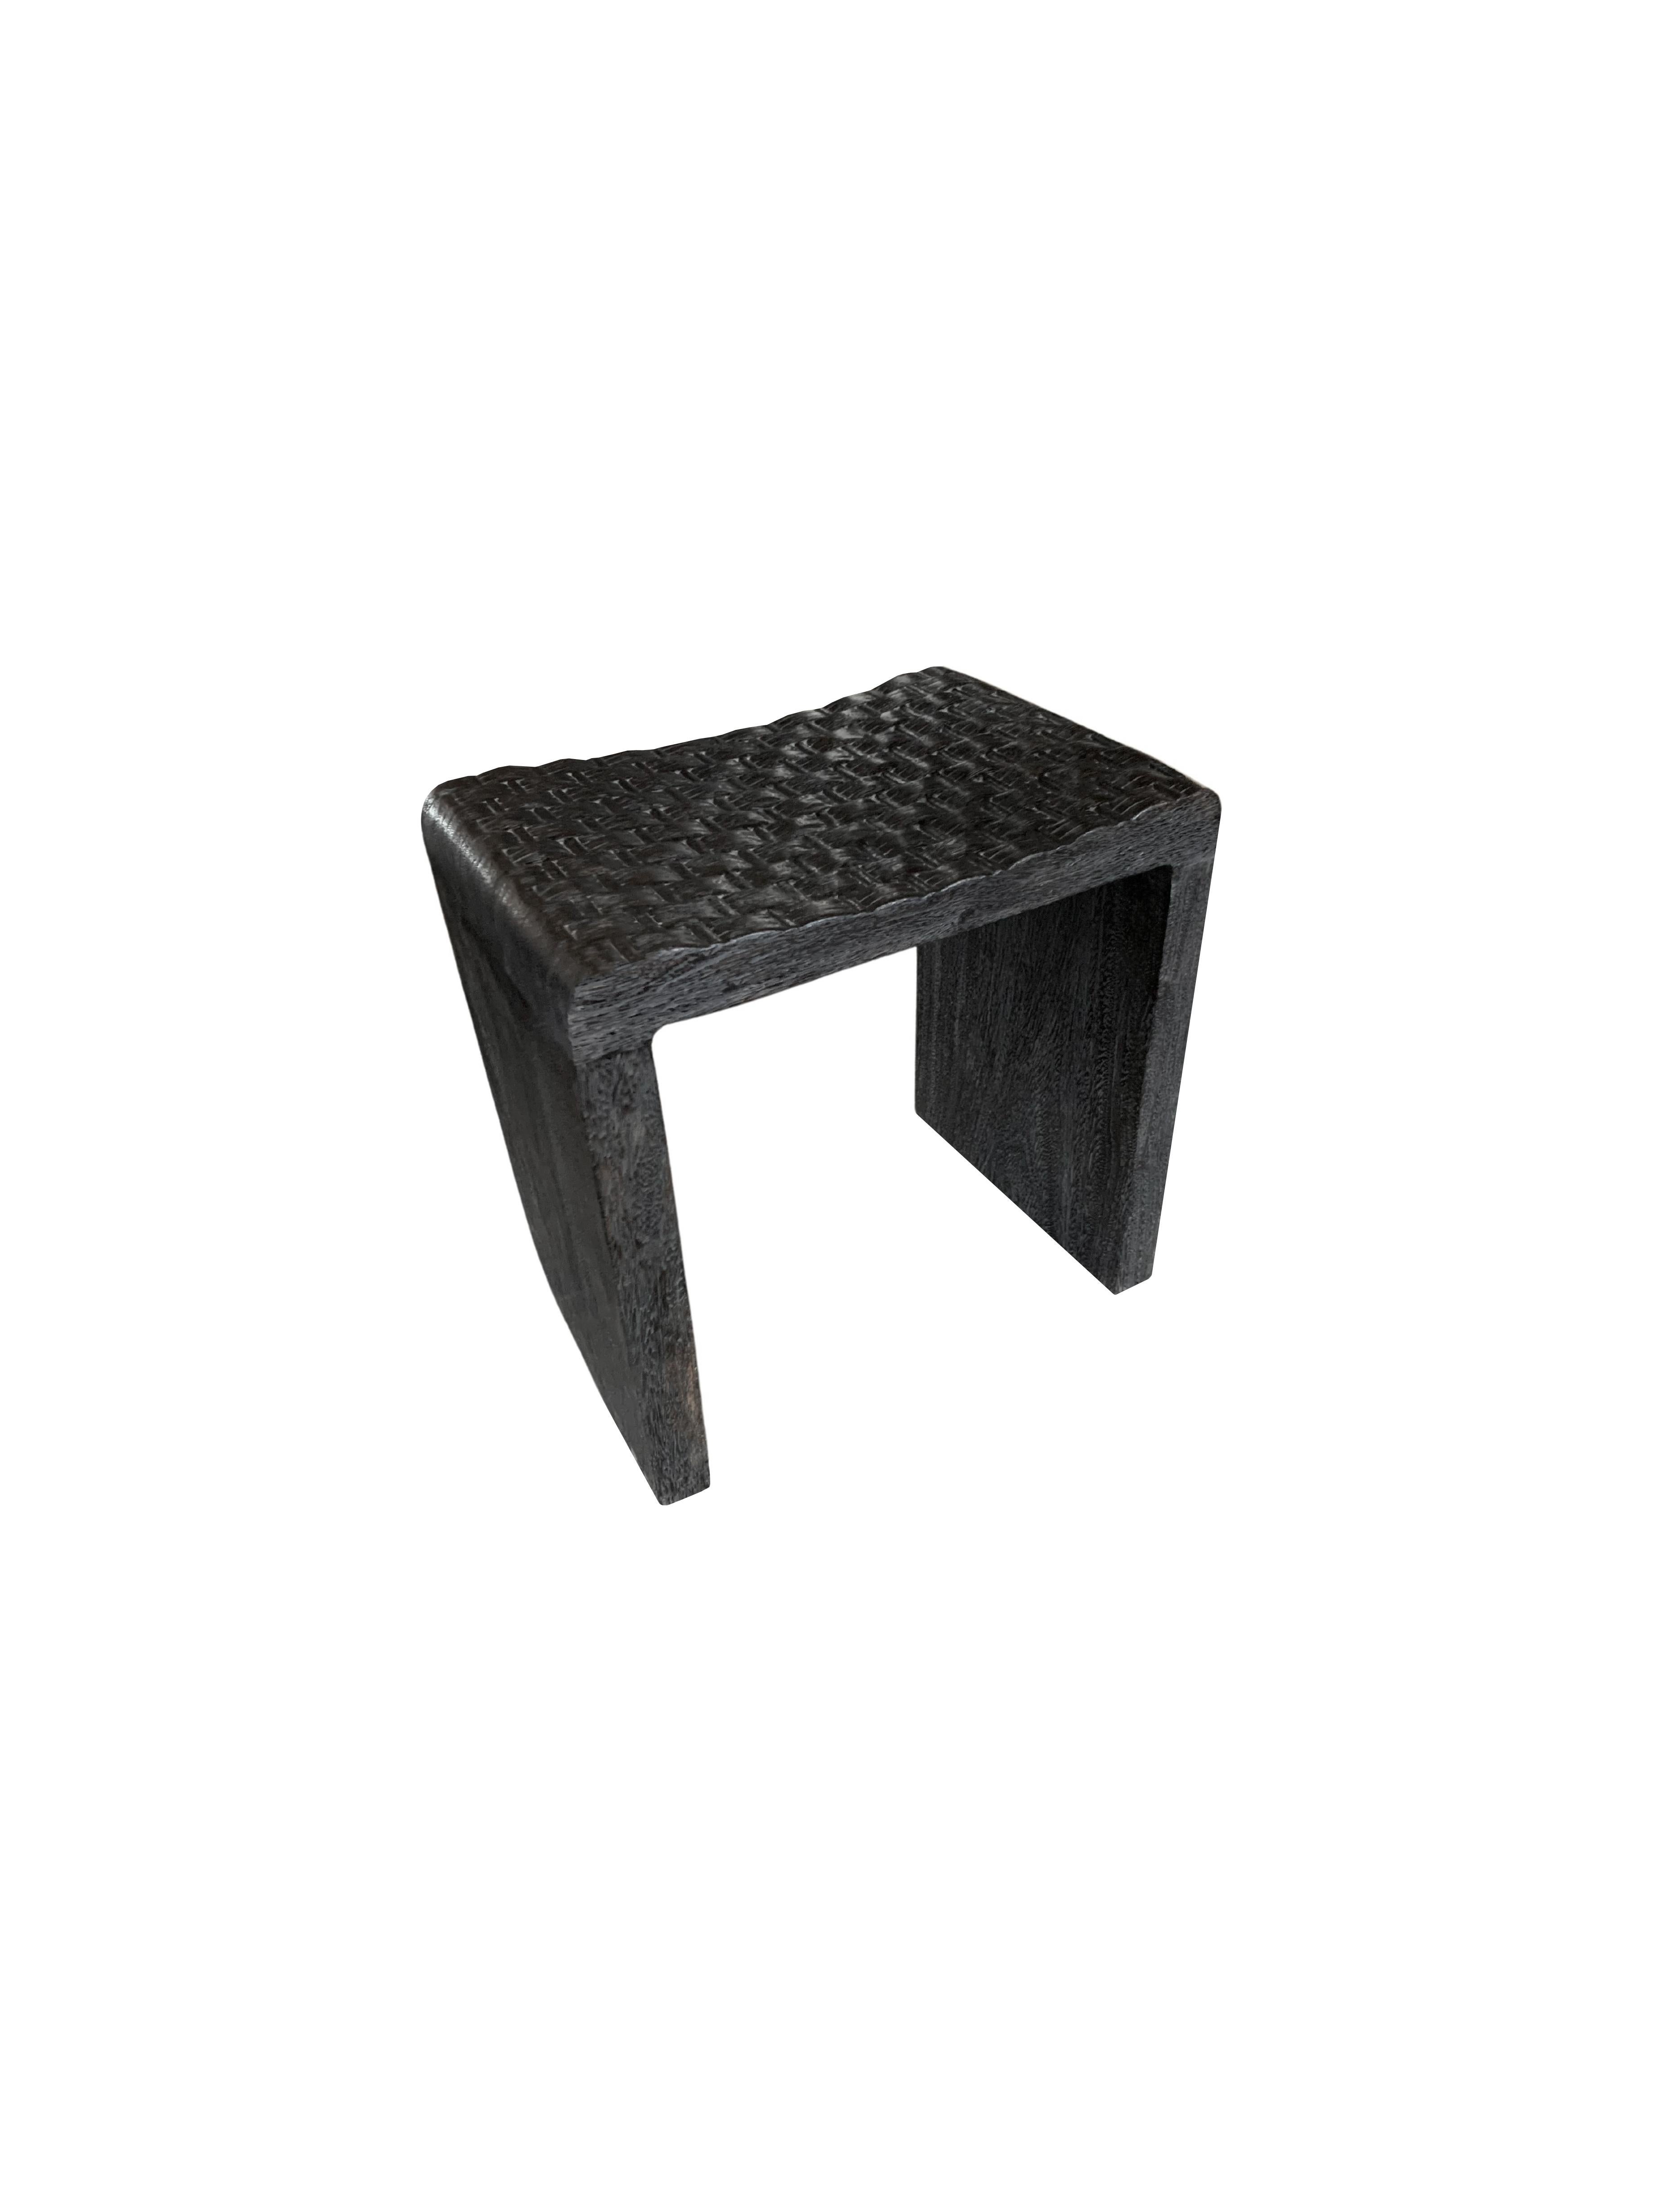 Indonesian Sculptural Mango Wood Stool with Carved Detailing & Burnt Finish Modern Organic For Sale